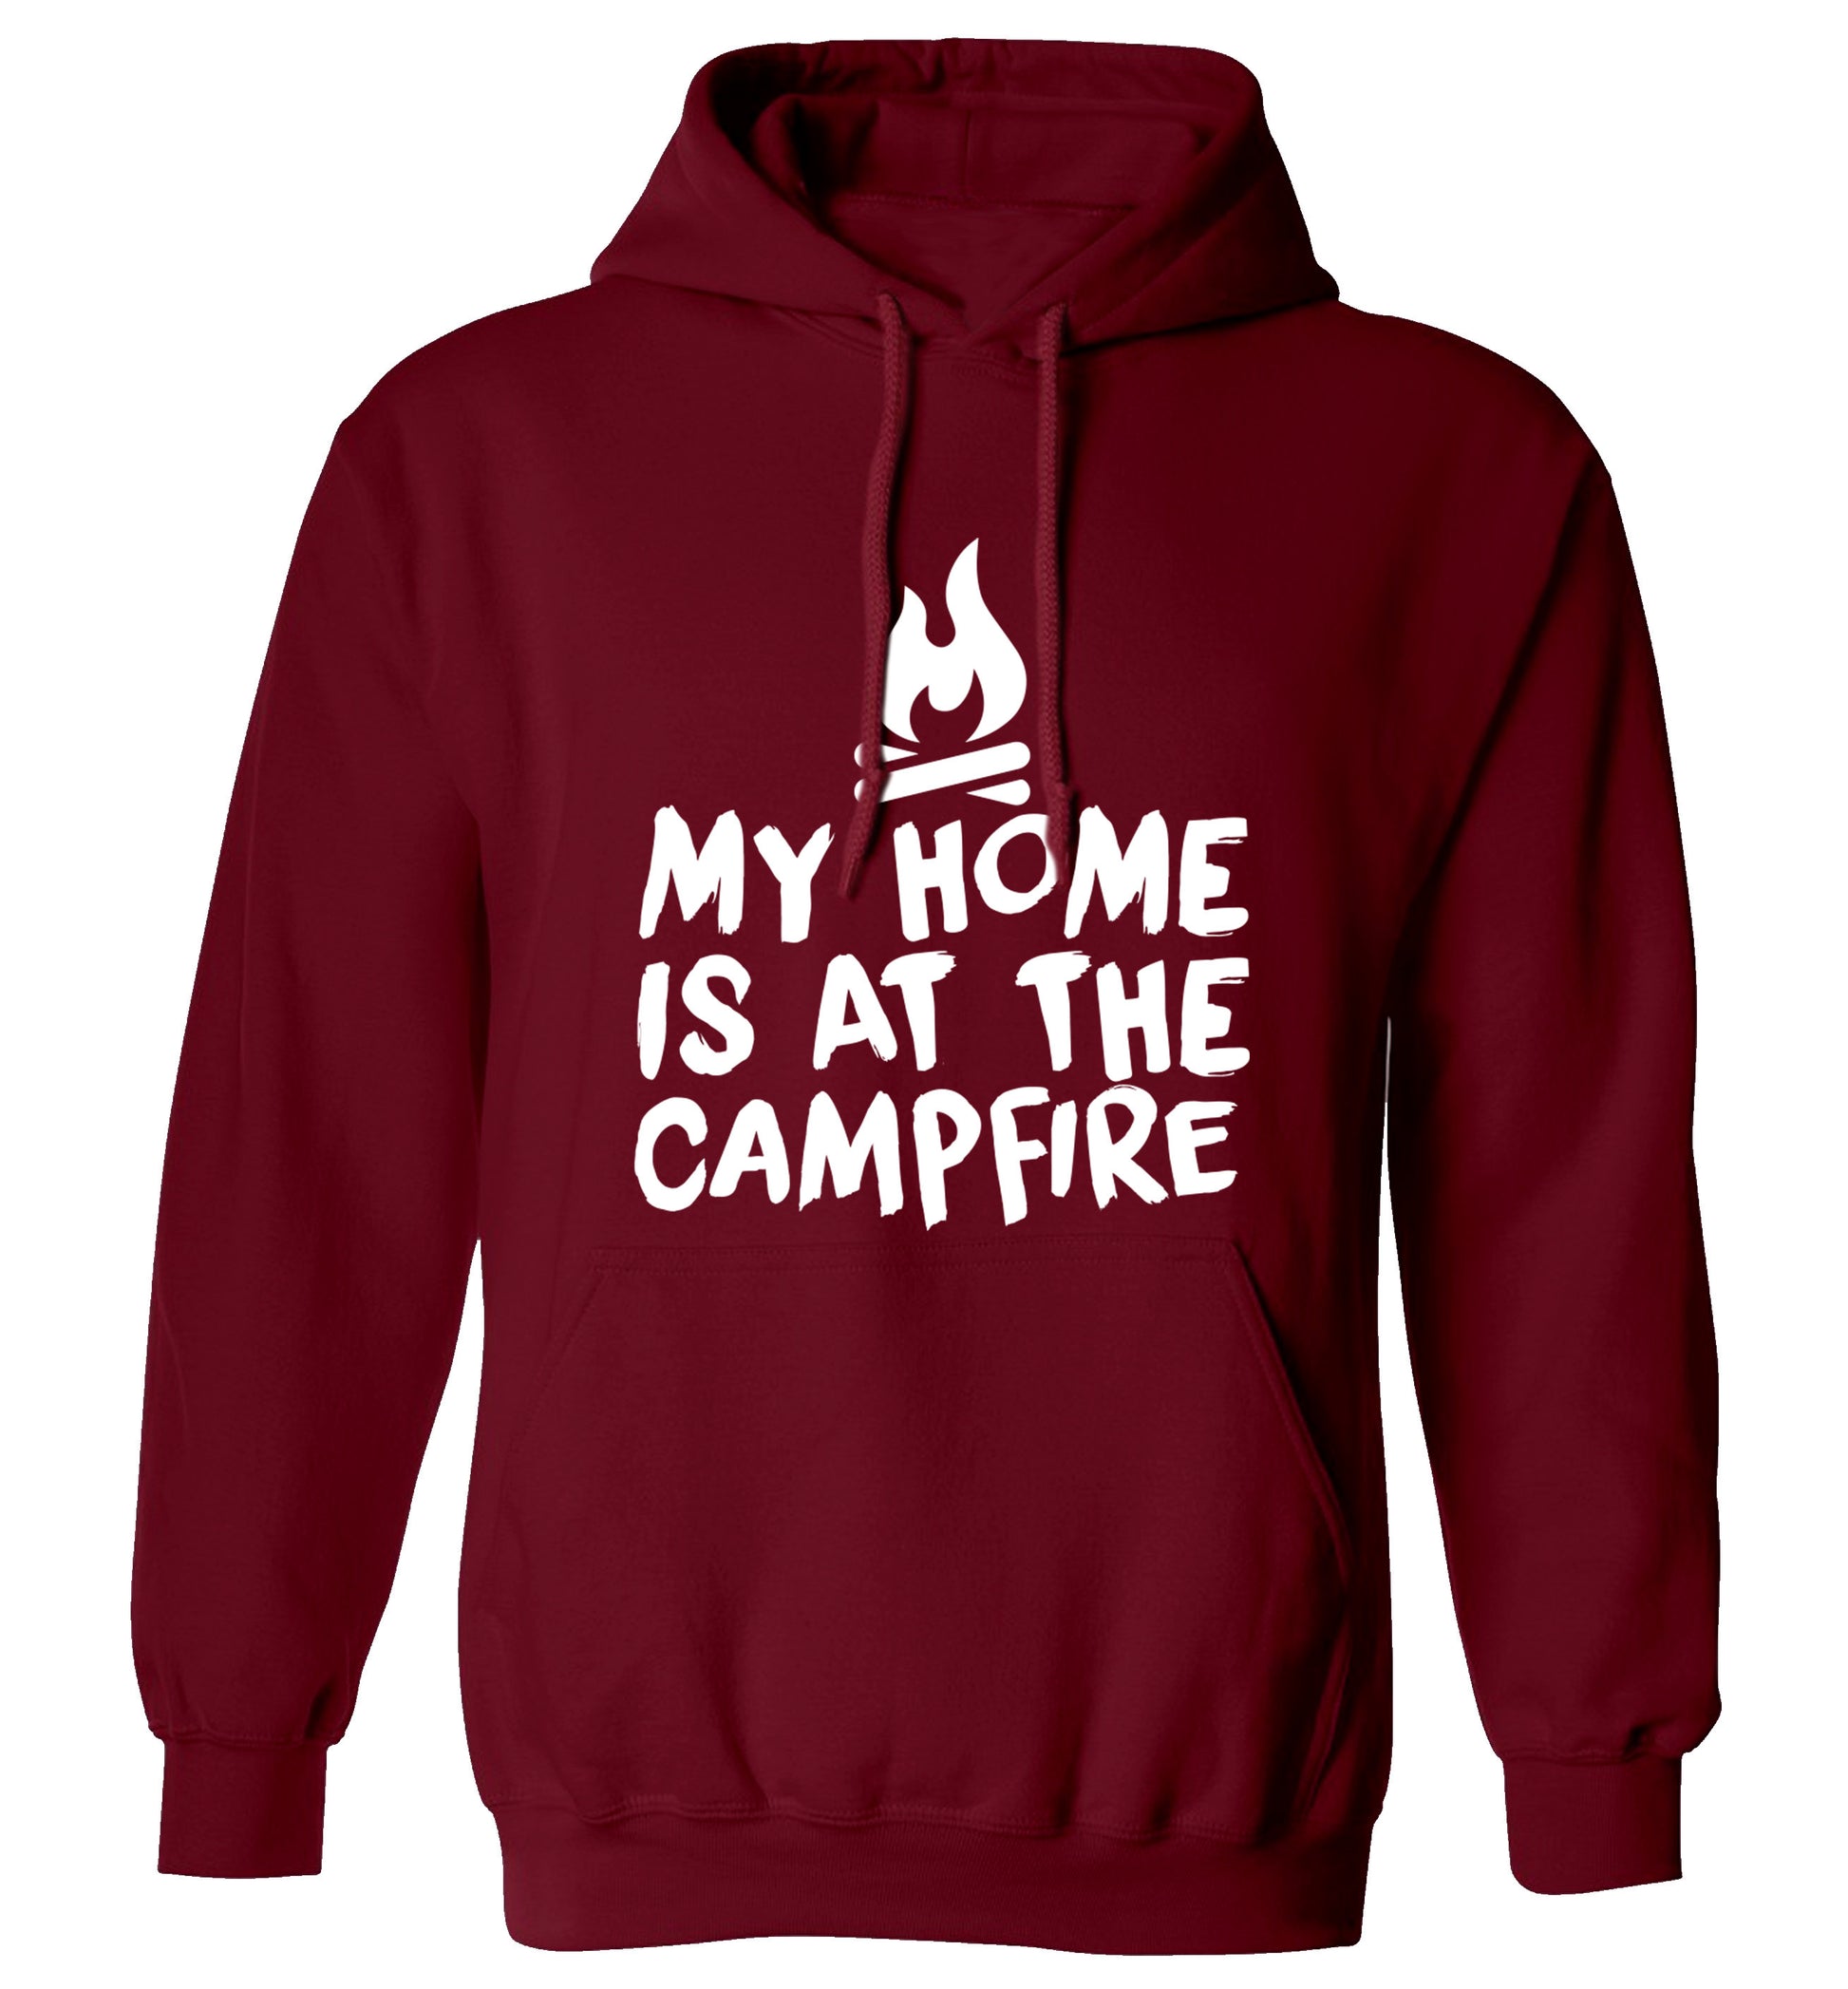 My home is at the campfire adults unisex maroon hoodie 2XL